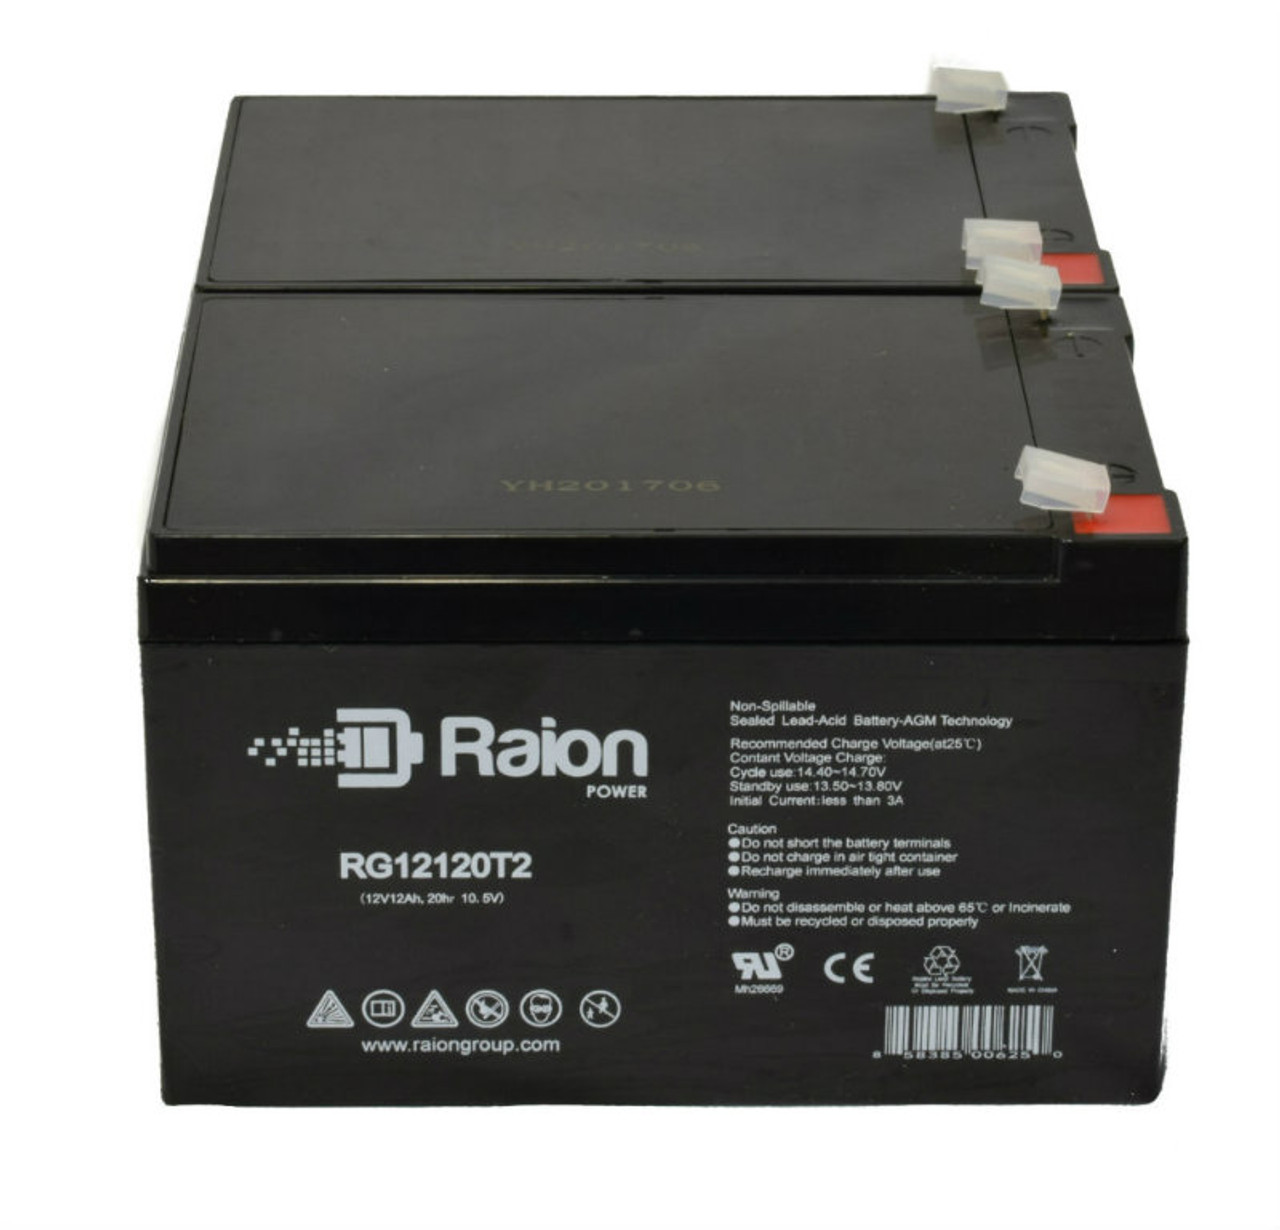 Raion Power RG12120T2 Replacement Battery Set for ShoPride Mobilityr Xtralite Jiffy (UL7WR, UL7WRII) Mobility Scooter - 2 Pack